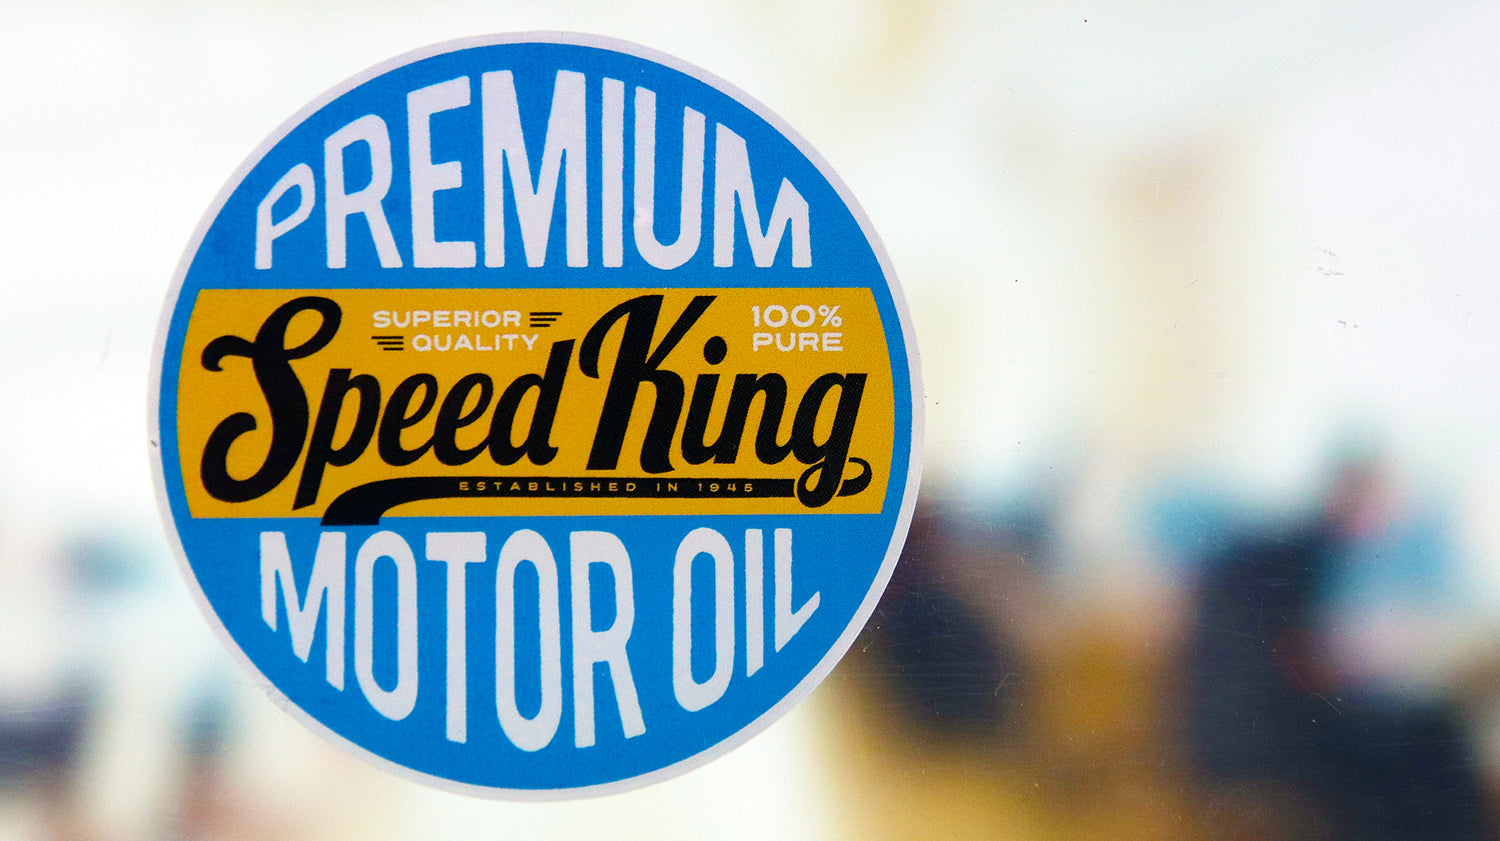 Eco-friendly front-adhesive circle sticker with speed king logo applied to a window